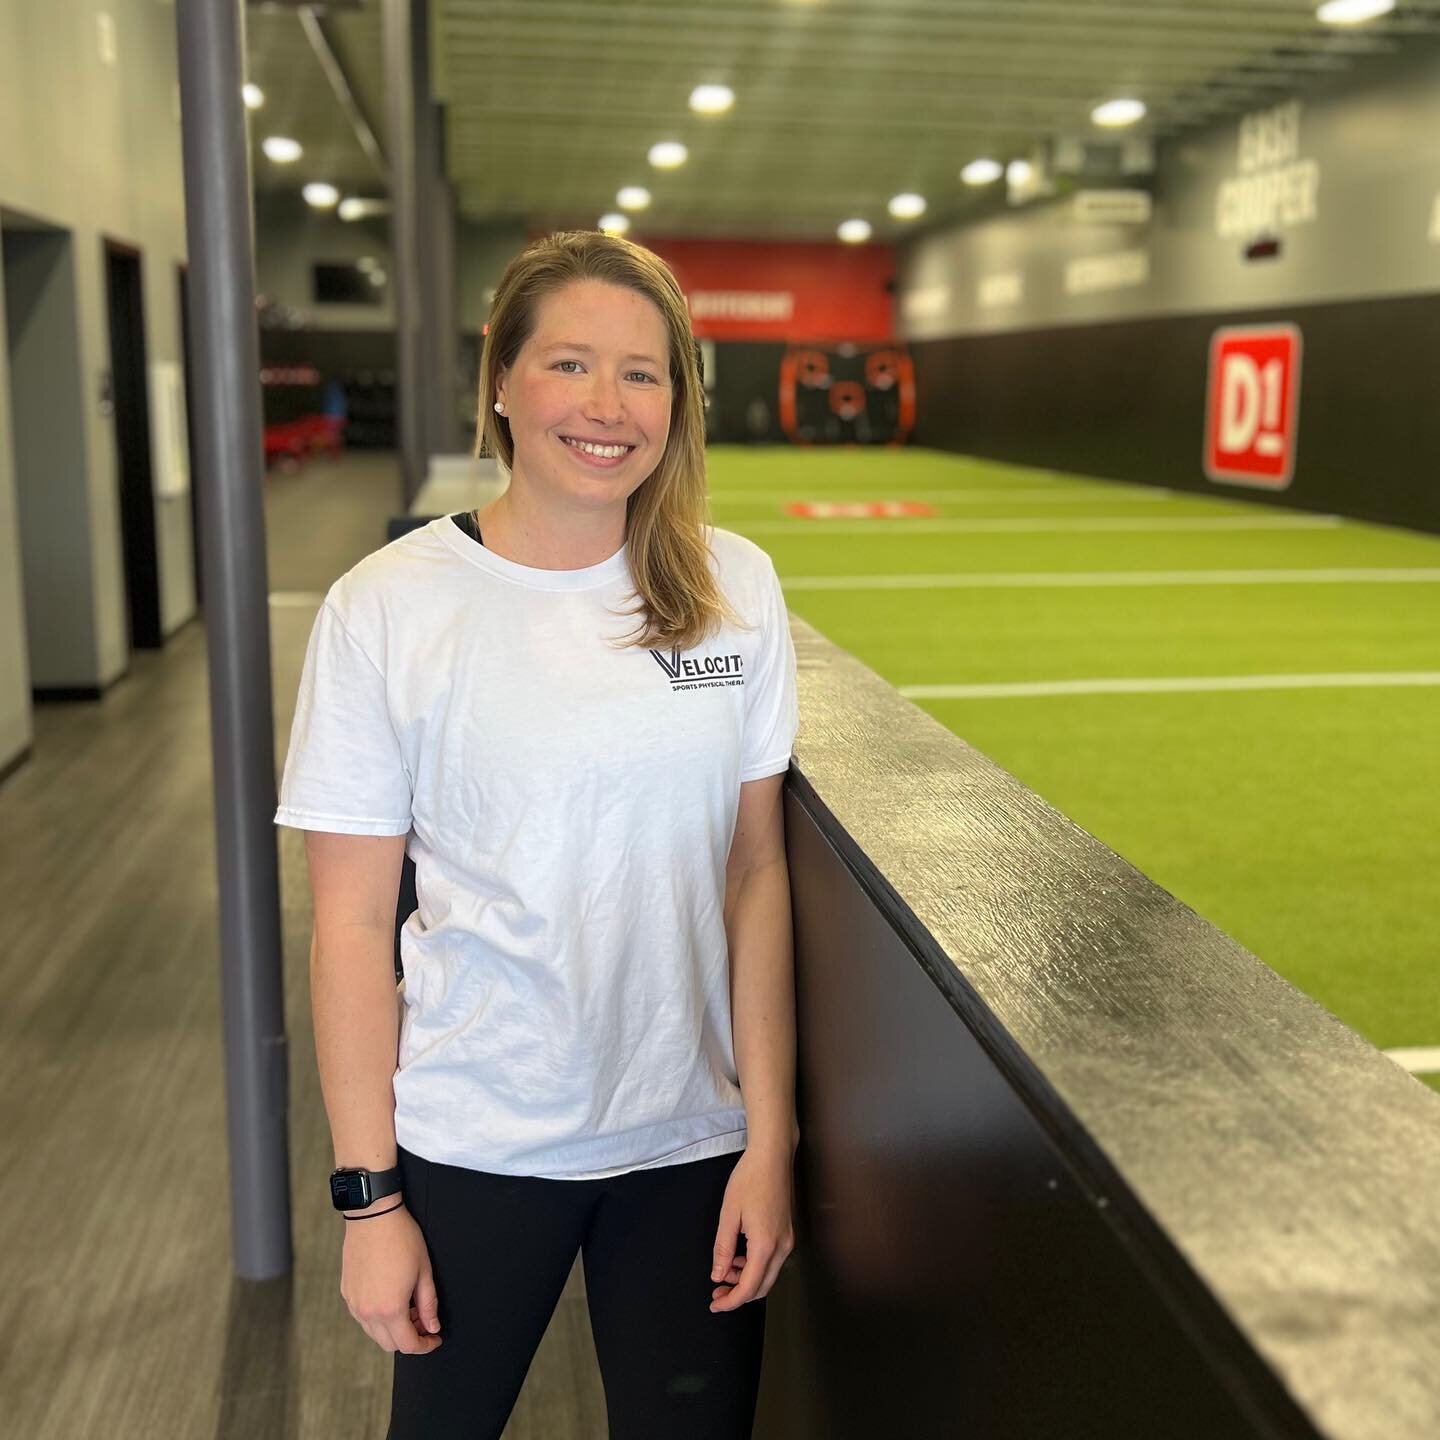 MEET THE TEAM

With a few new faces here on the profile, we figured it would be a good time to reintroduce the people behind the business!

Dr. Emily Scott is a physical therapist who specializes in treating athletes and other highly active individua